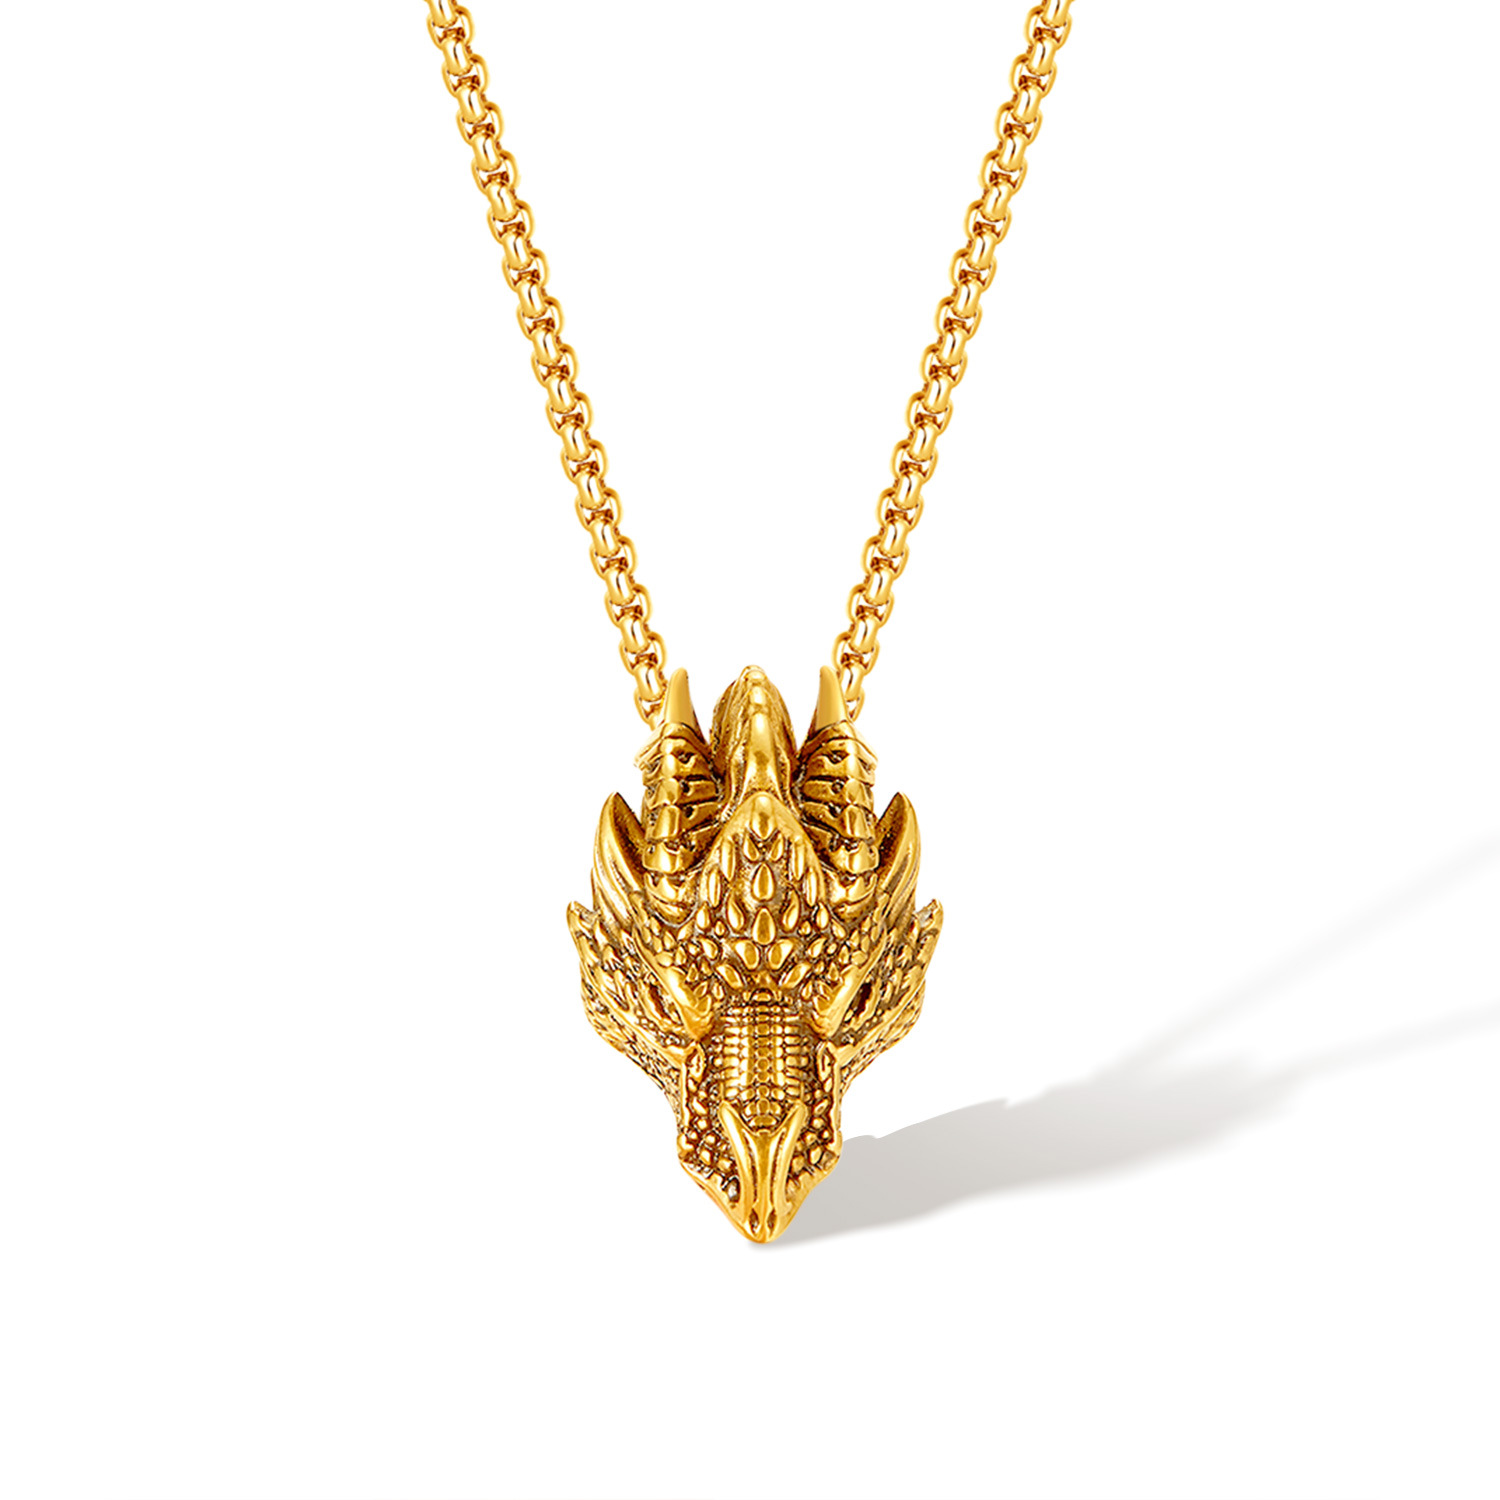 5:Gold pendant with chain 3x55cm